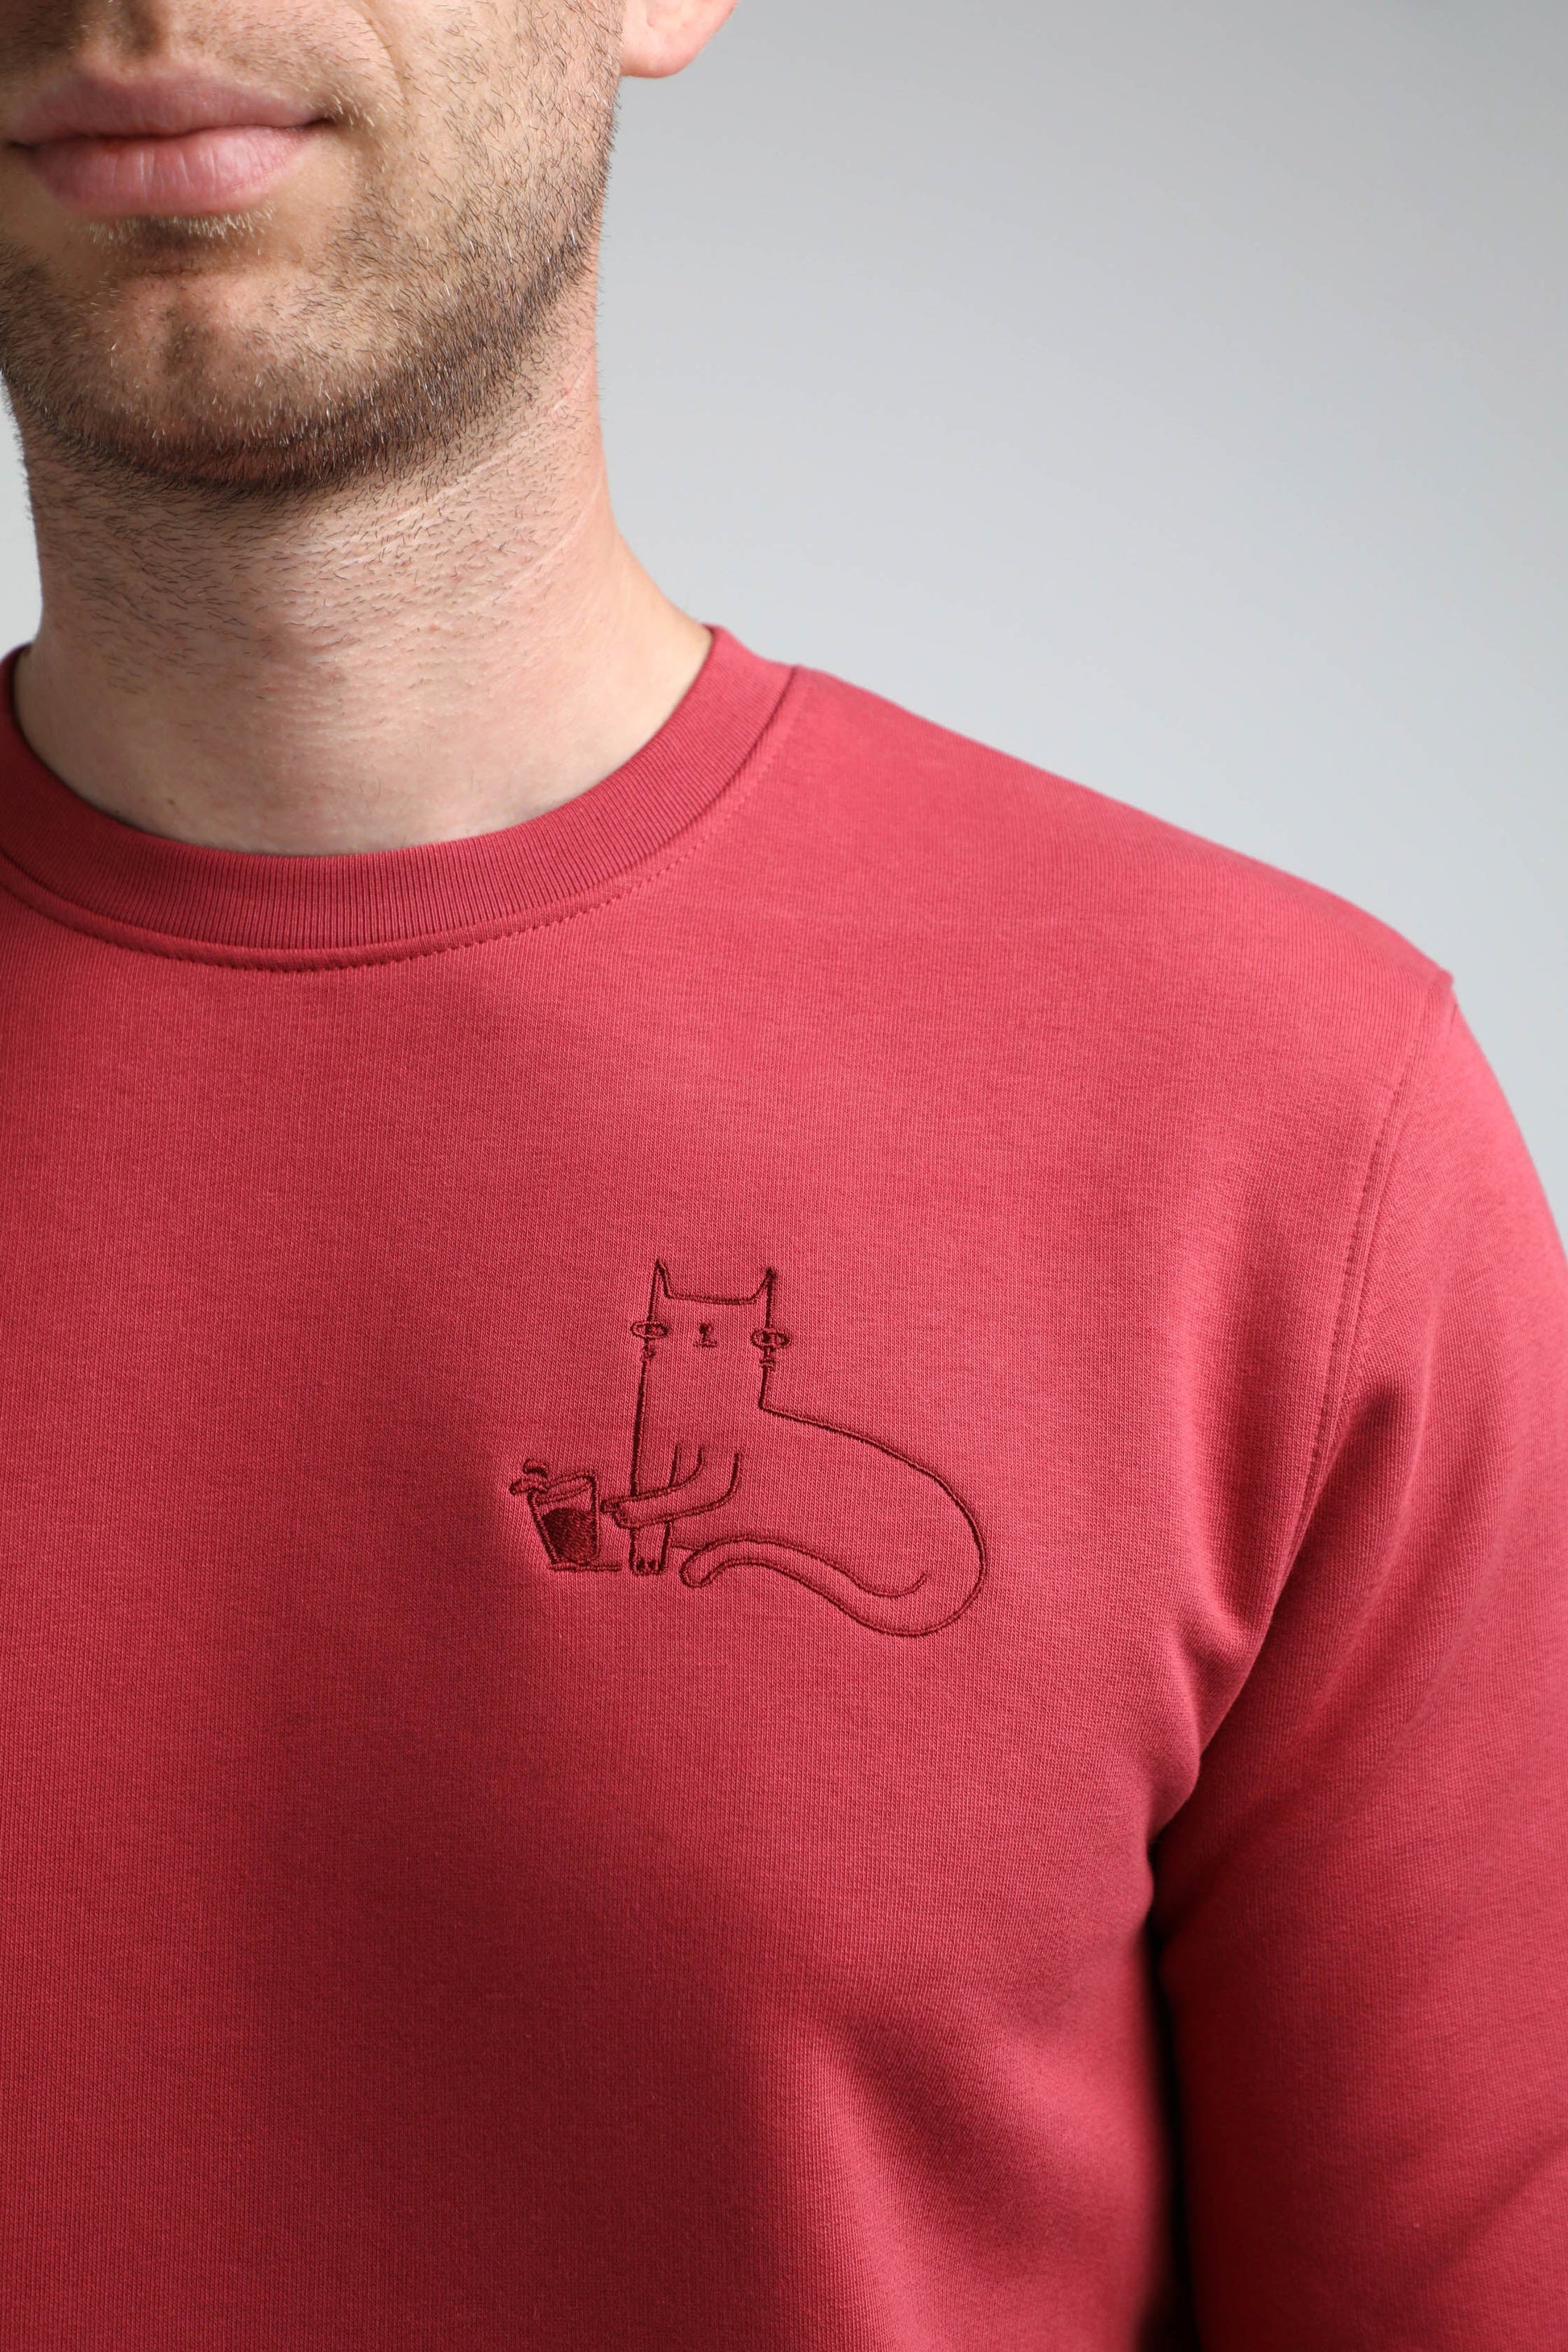 -25% | S available only | Cat | Crew neck sweatshirt with embroidered cat. Regular fit | Unisex - premium dog goods handmade in Europe by My Wild Other